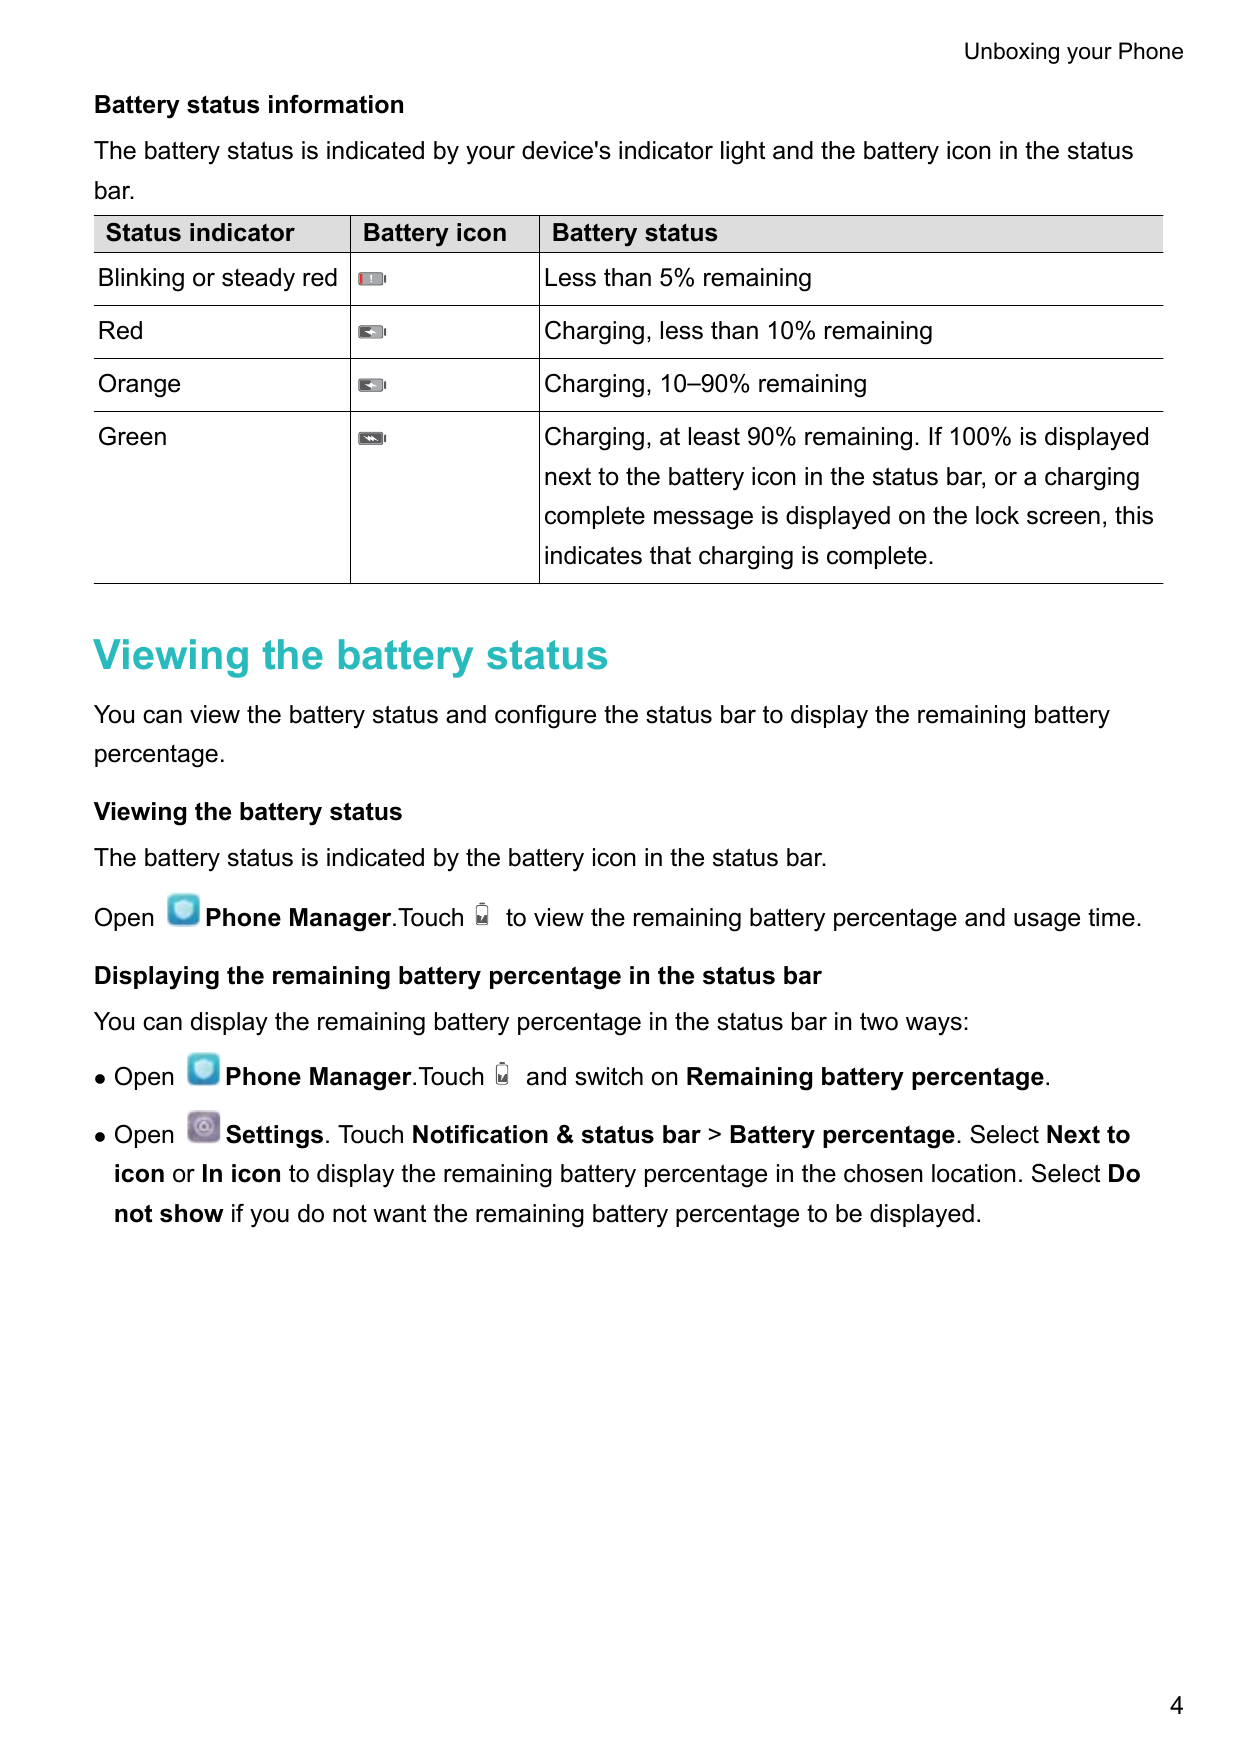 Unboxing your PhoneBattery status informationThe battery status is indicated by your device's indicator light and the battery ic